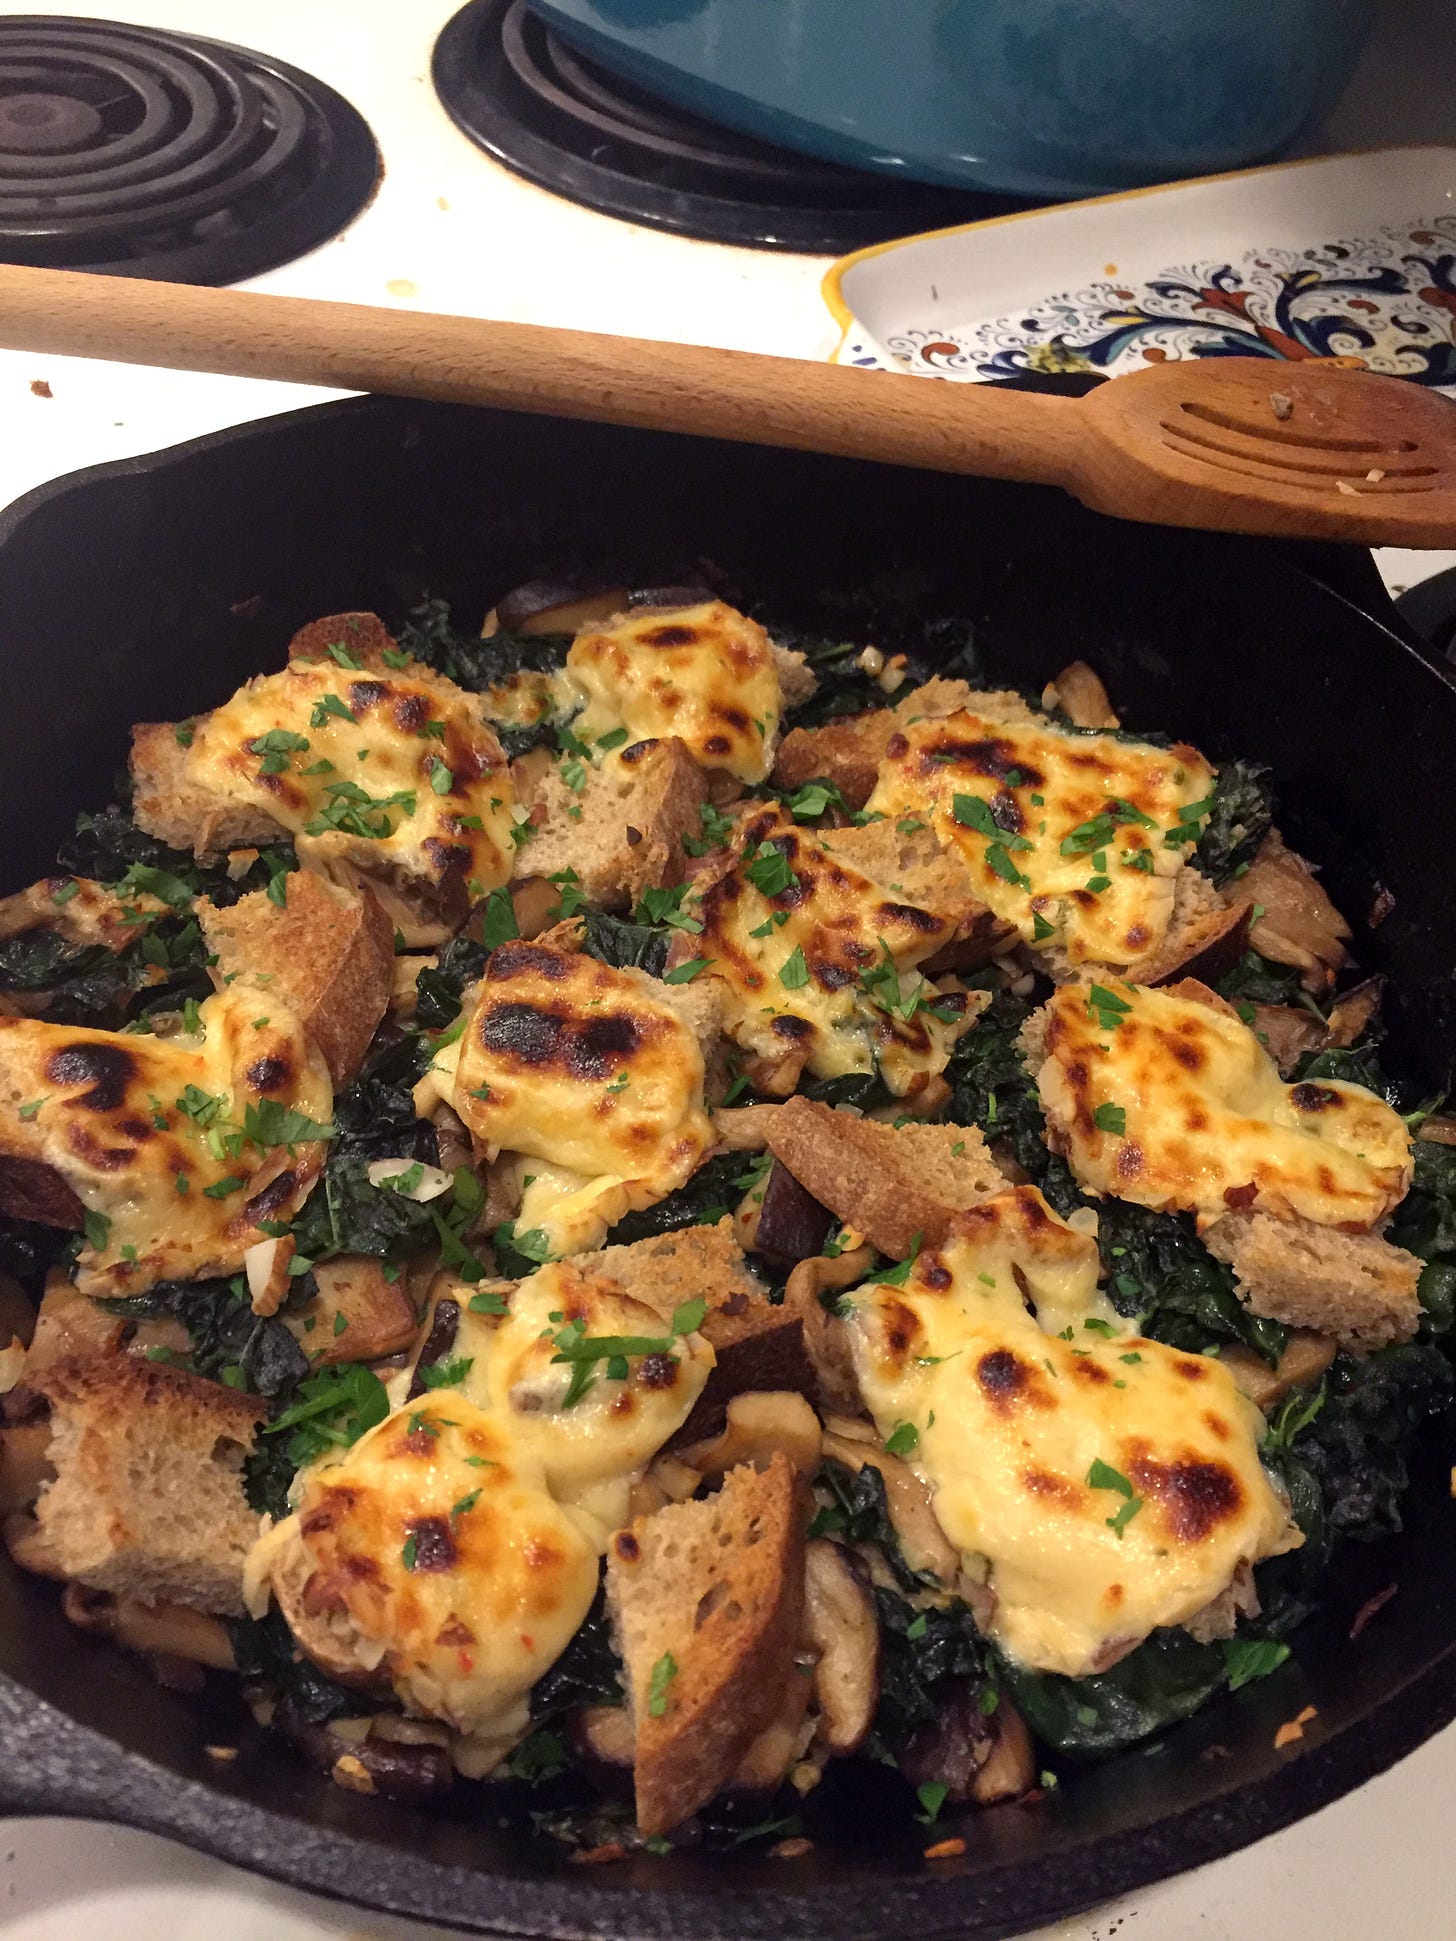 a cast iron pan full of croutons, kale, and mushrooms, with browned slices of pepper jack cheese on top. A slotted wooden spoon sits on the edge of the pan.